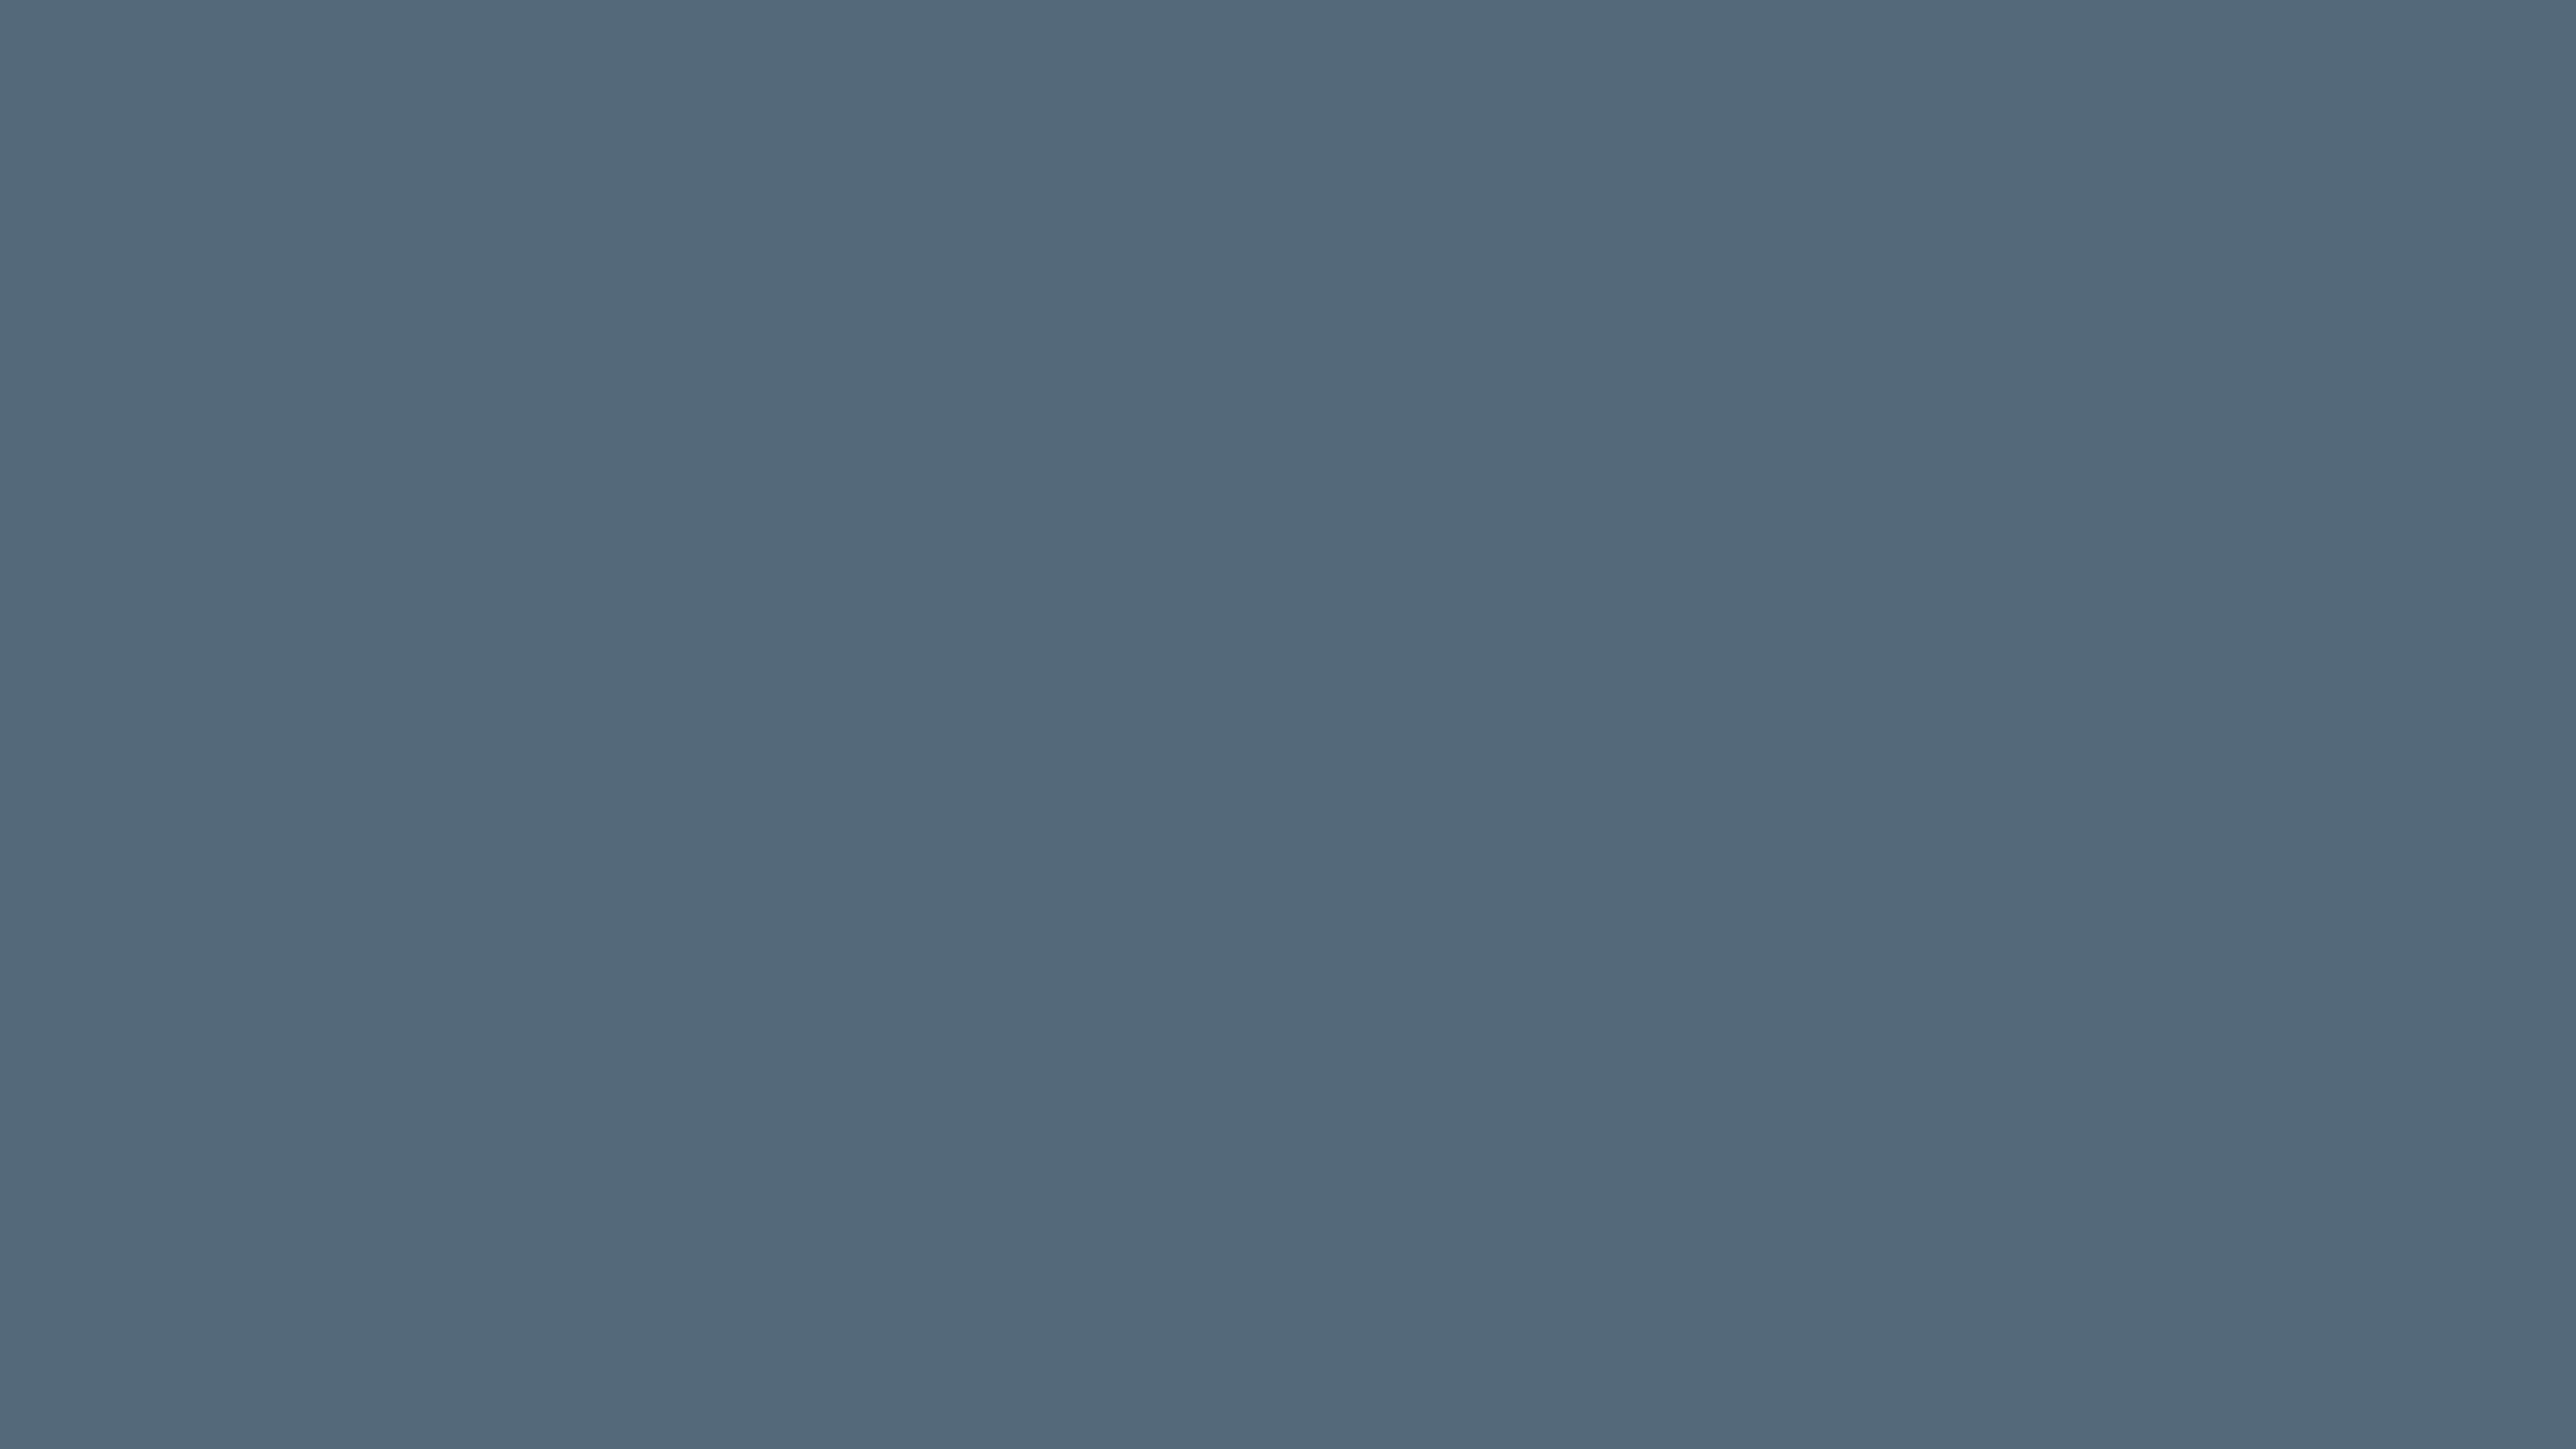 7680x4320 Paynes Grey Solid Color Background